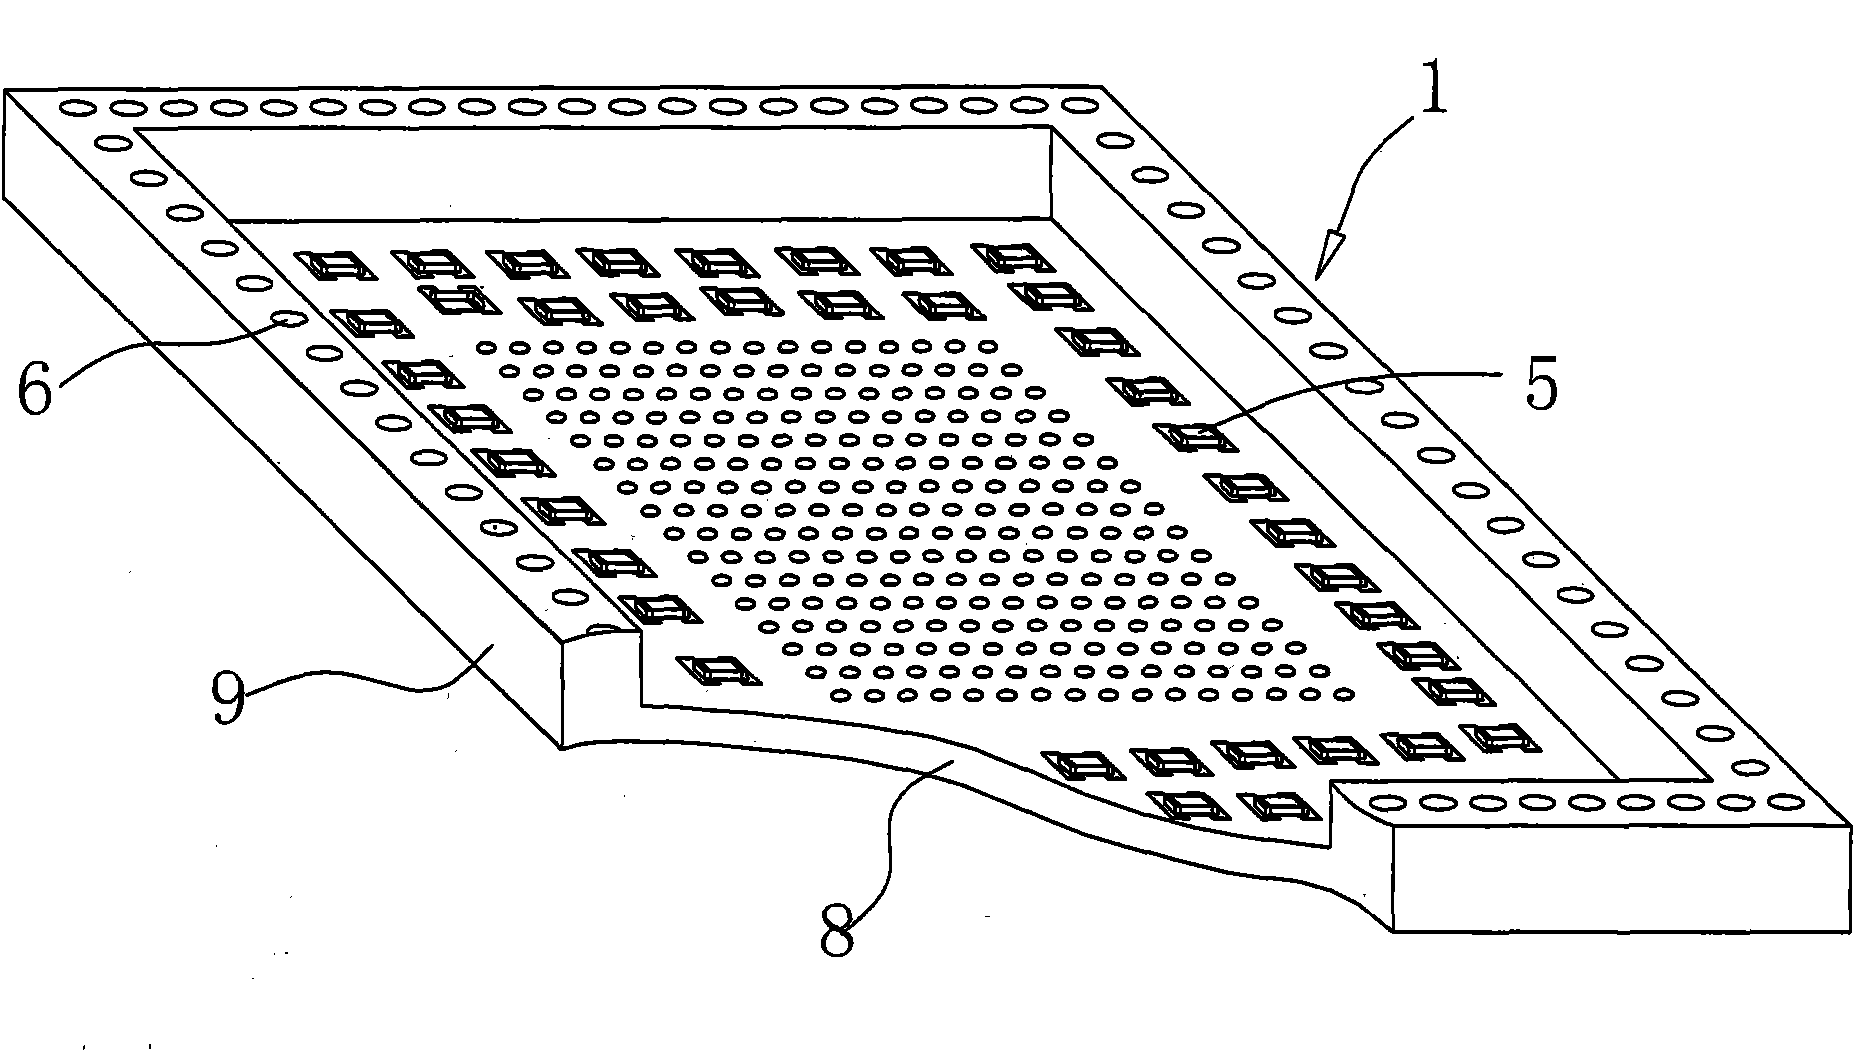 Multi-module packaged component